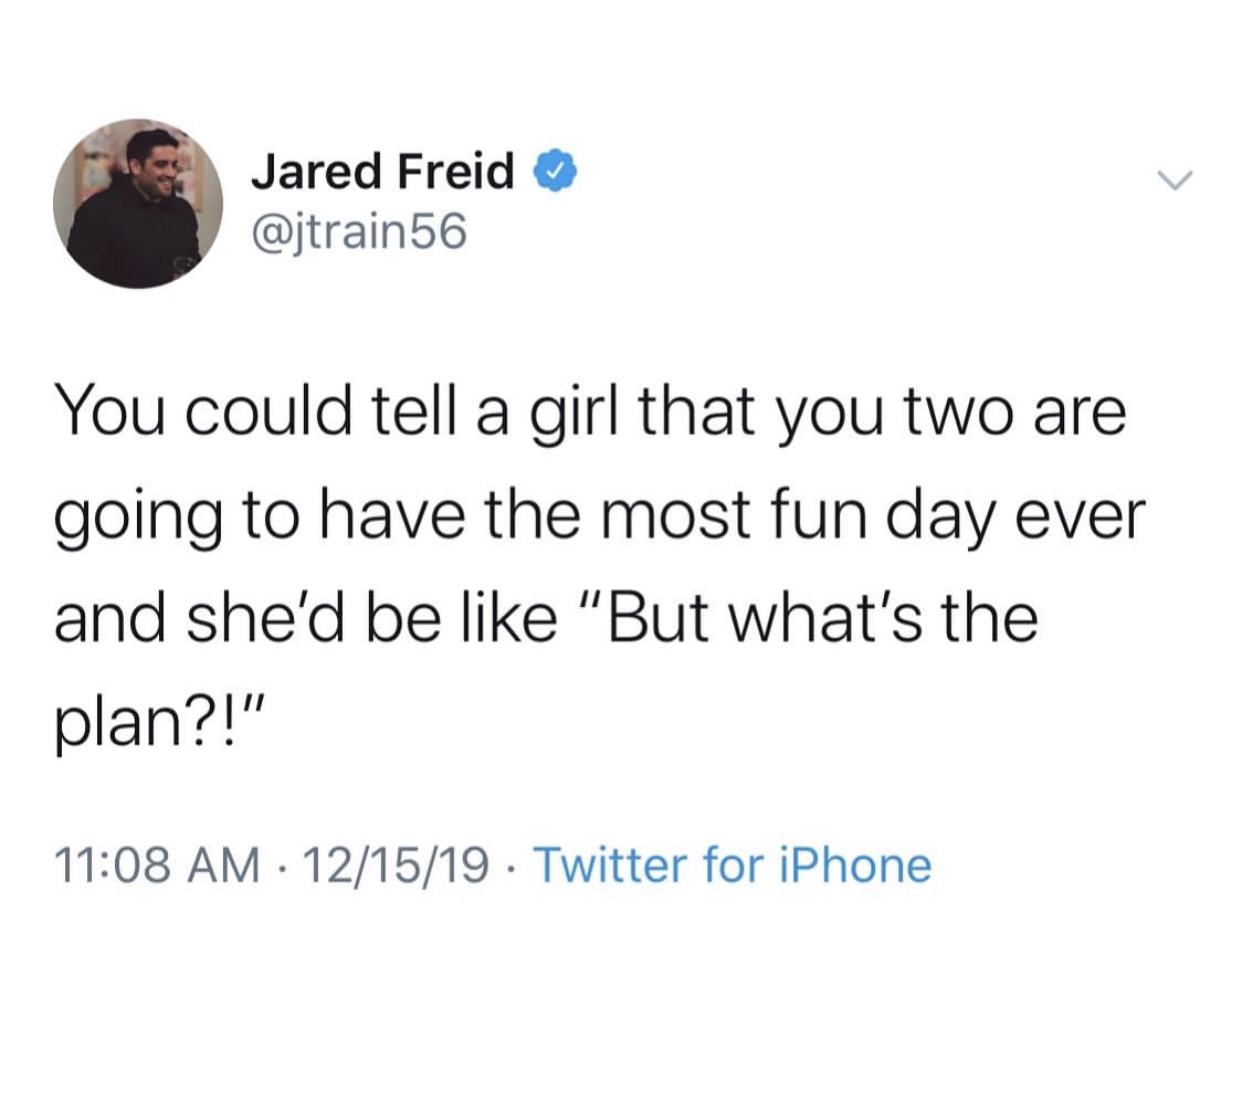 aldi halloween candy meme - Jared Freid You could tell a girl that you two are going to have the most fun day ever and she'd be "But what's the plan?!" 121519 Twitter for iPhone